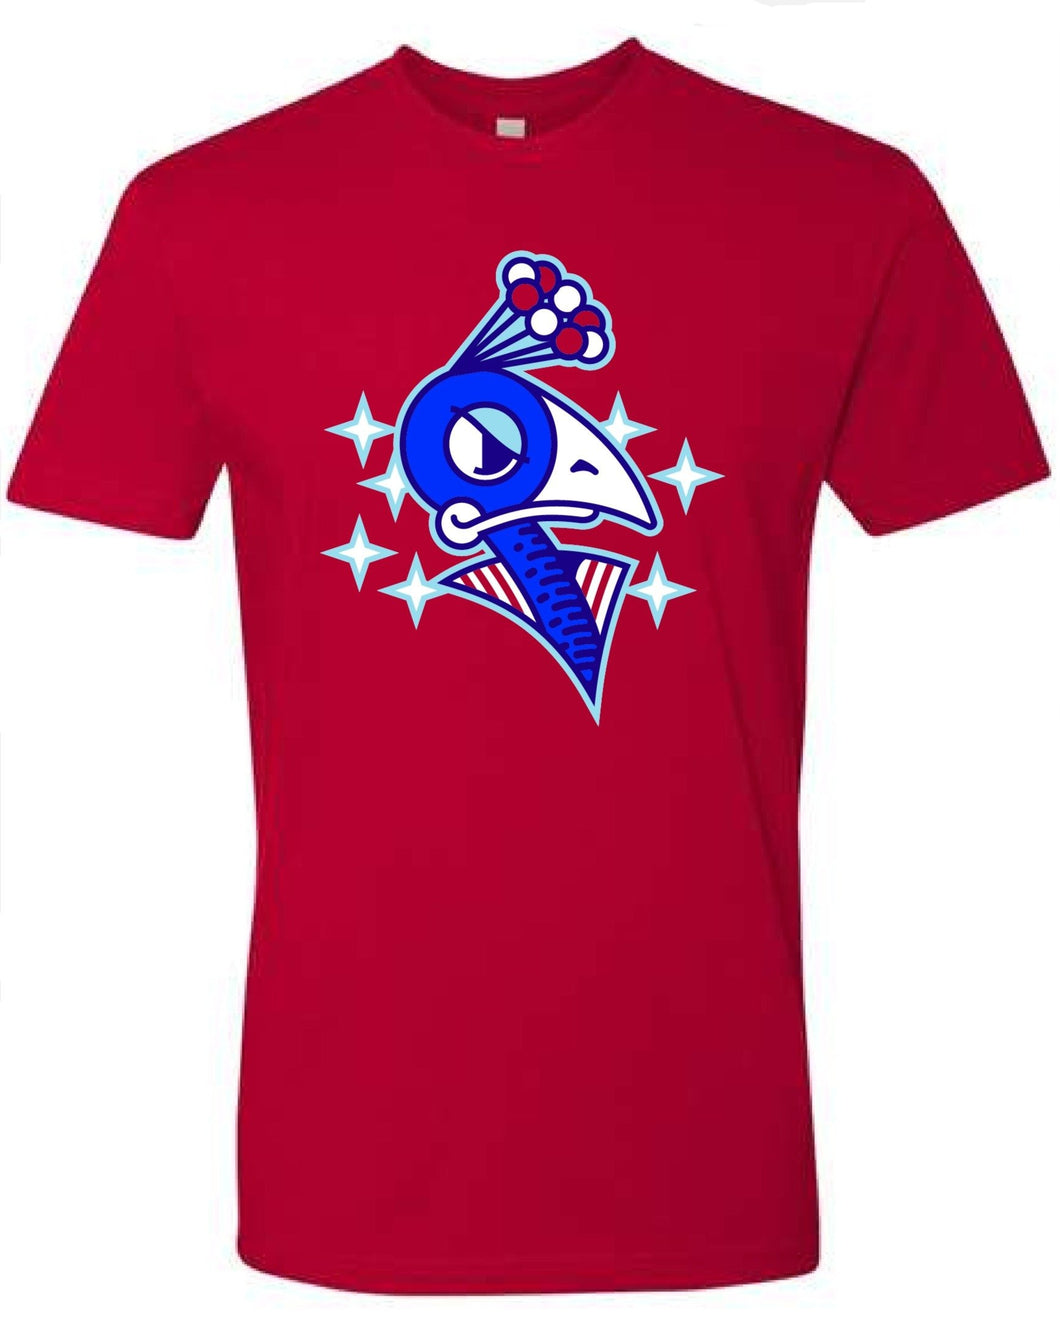 Limited Red, White & Blue Tee